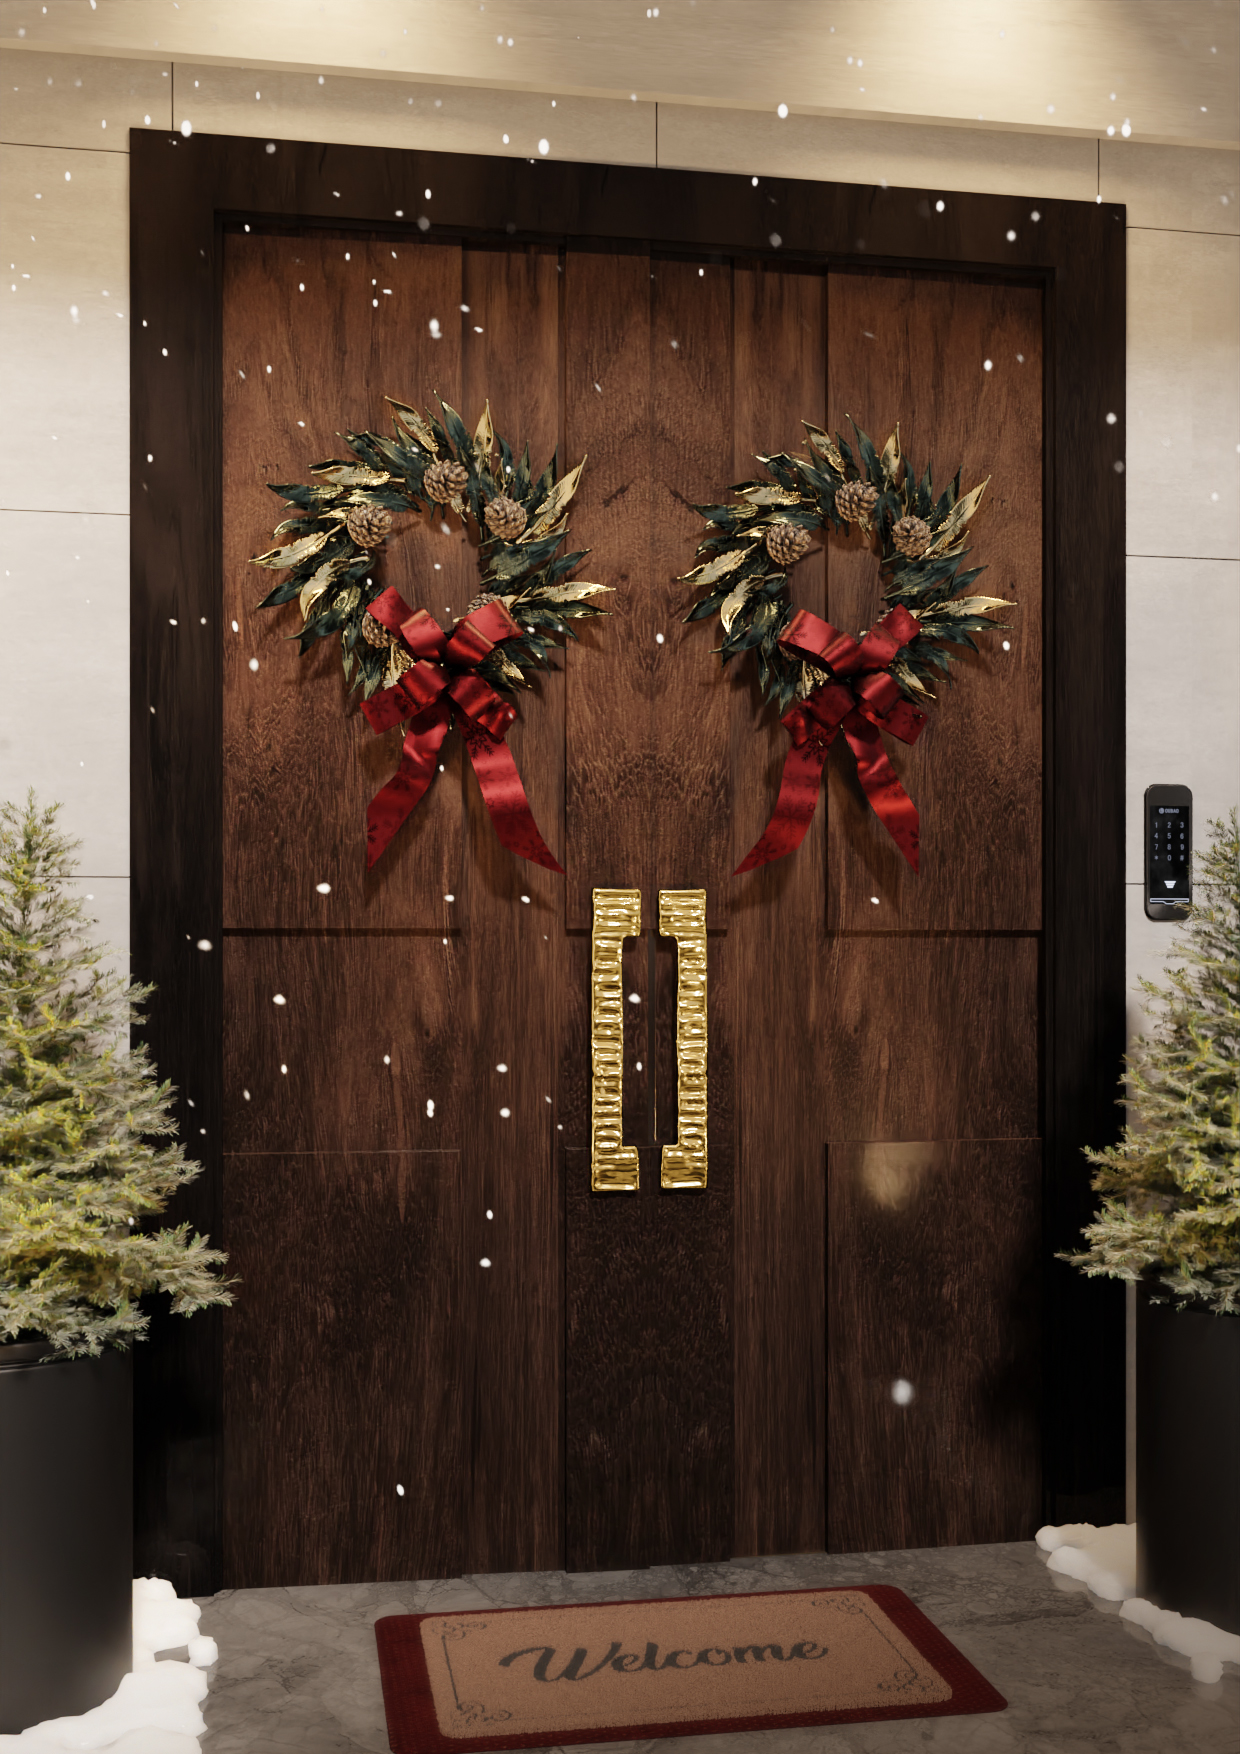 HOLIDAY DECOR IDEAS: ENTER THE MAGICAL SEASON WITH ONE-OF-A-KIND HARDWARE